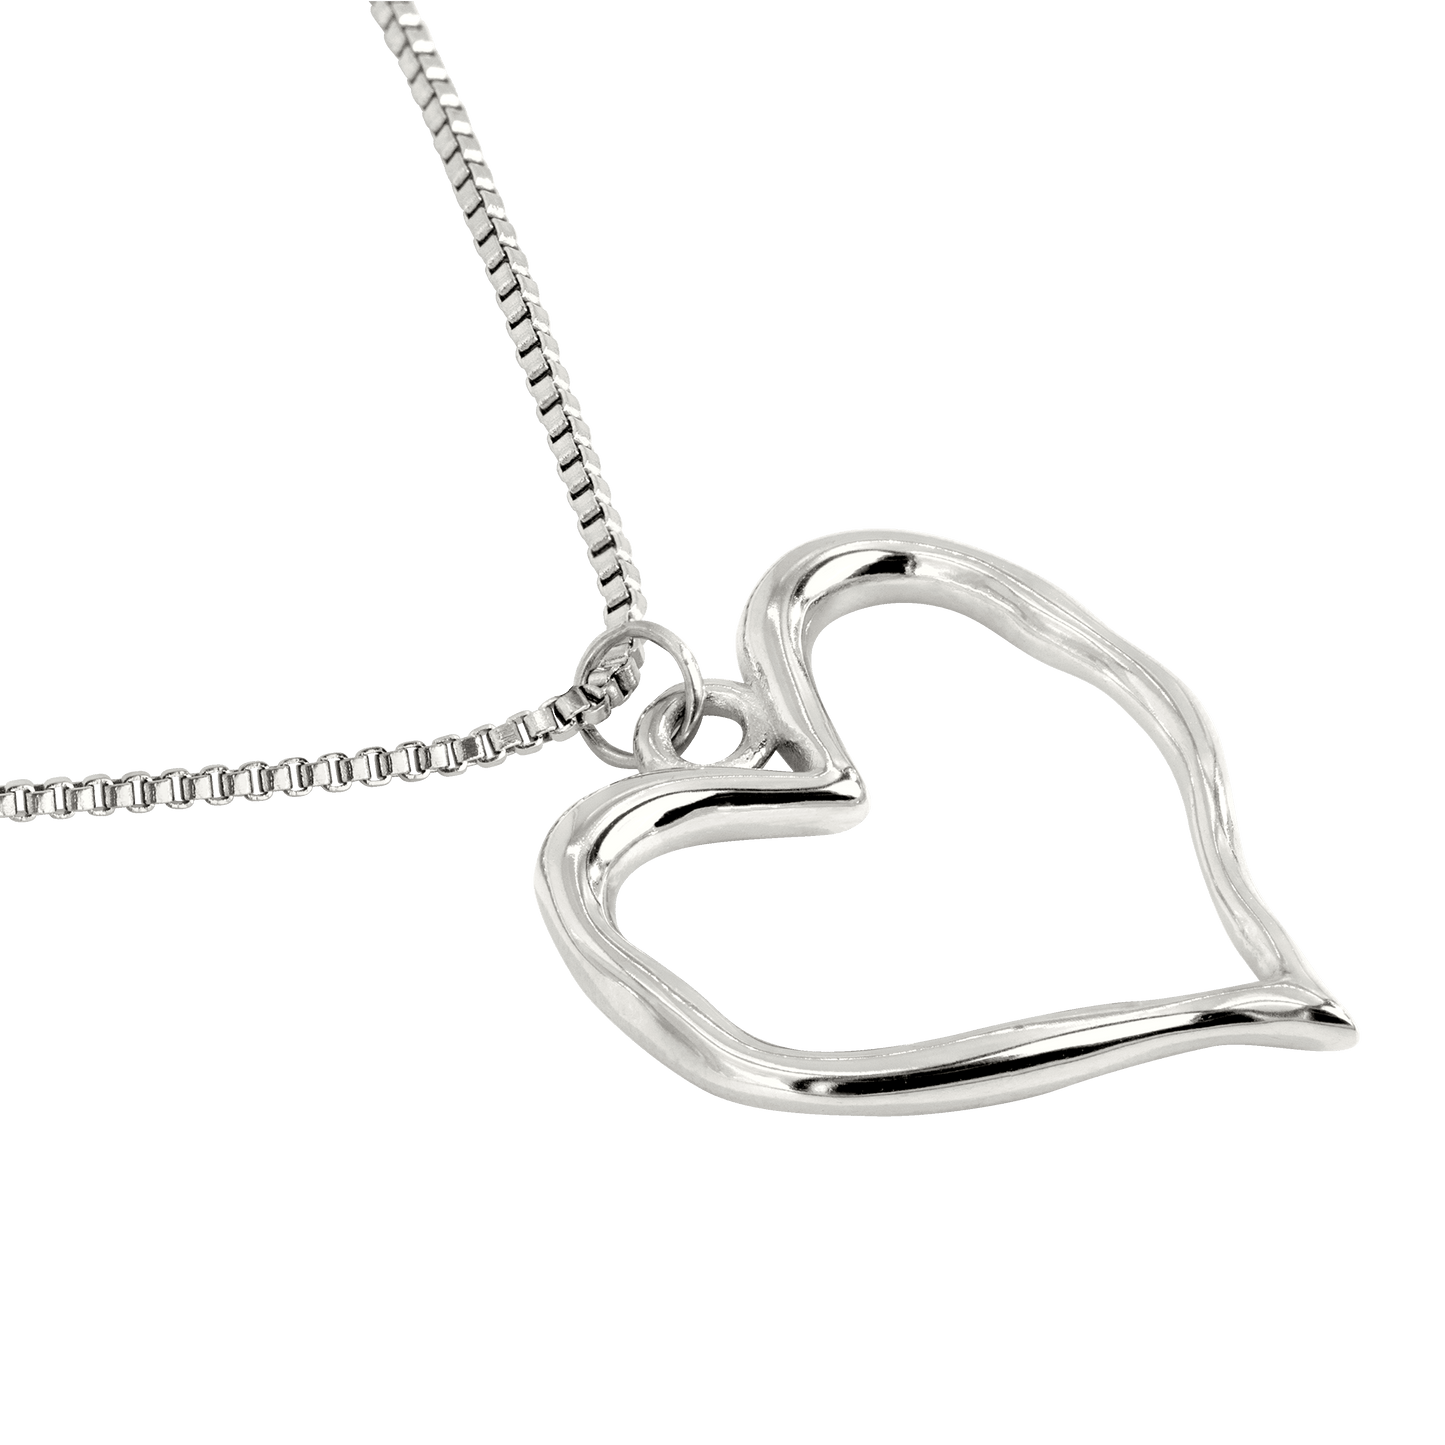 Melting Heart Necklace Silber